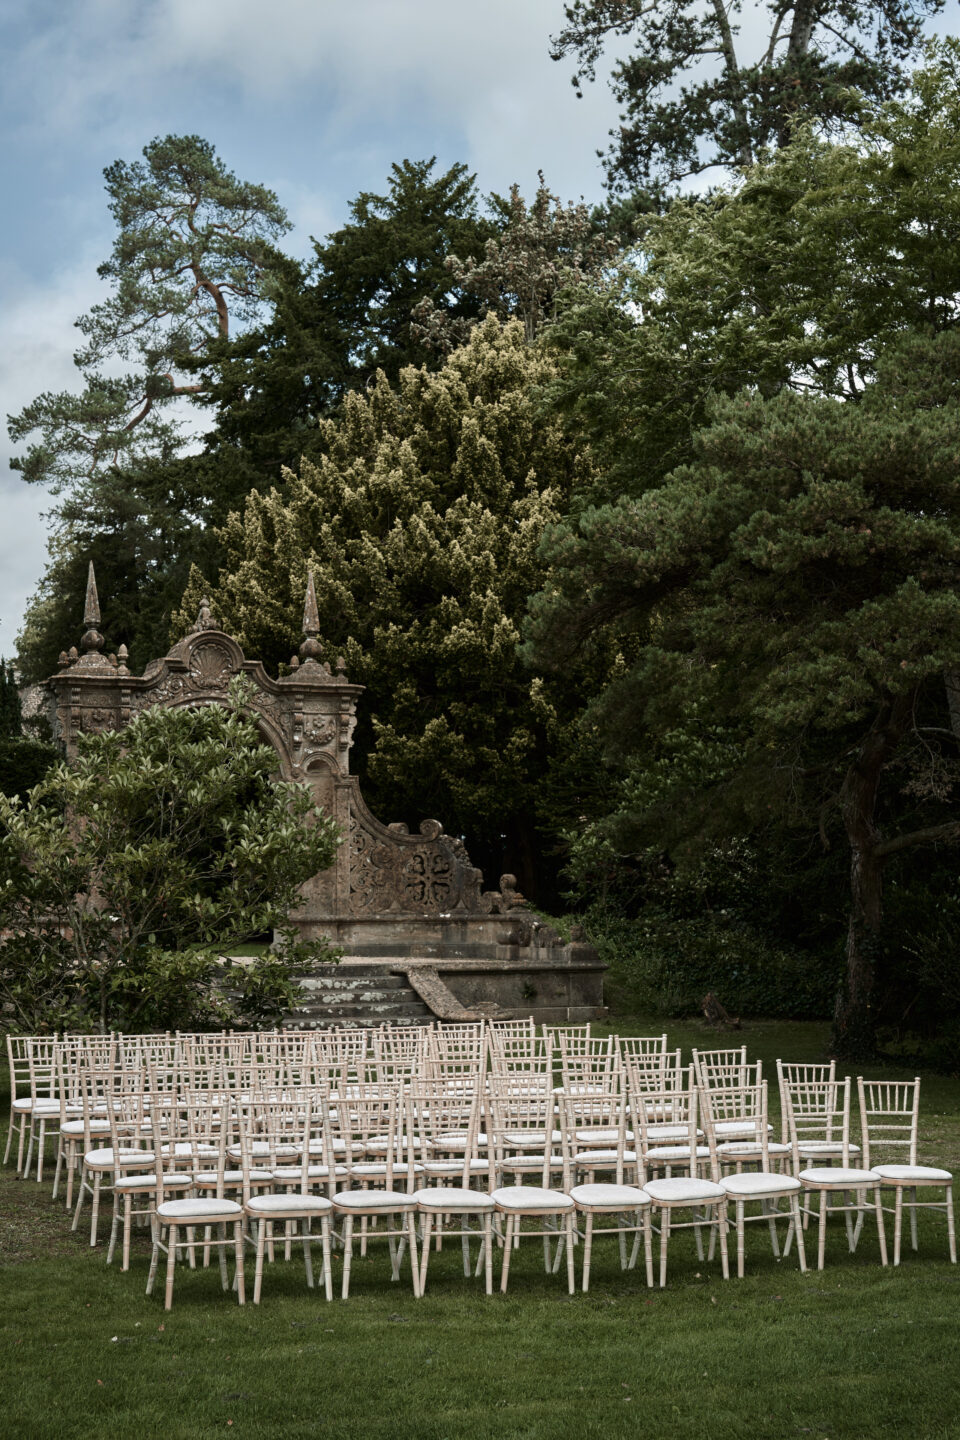 A wedding is being arranged in a garden and chairs are set up.